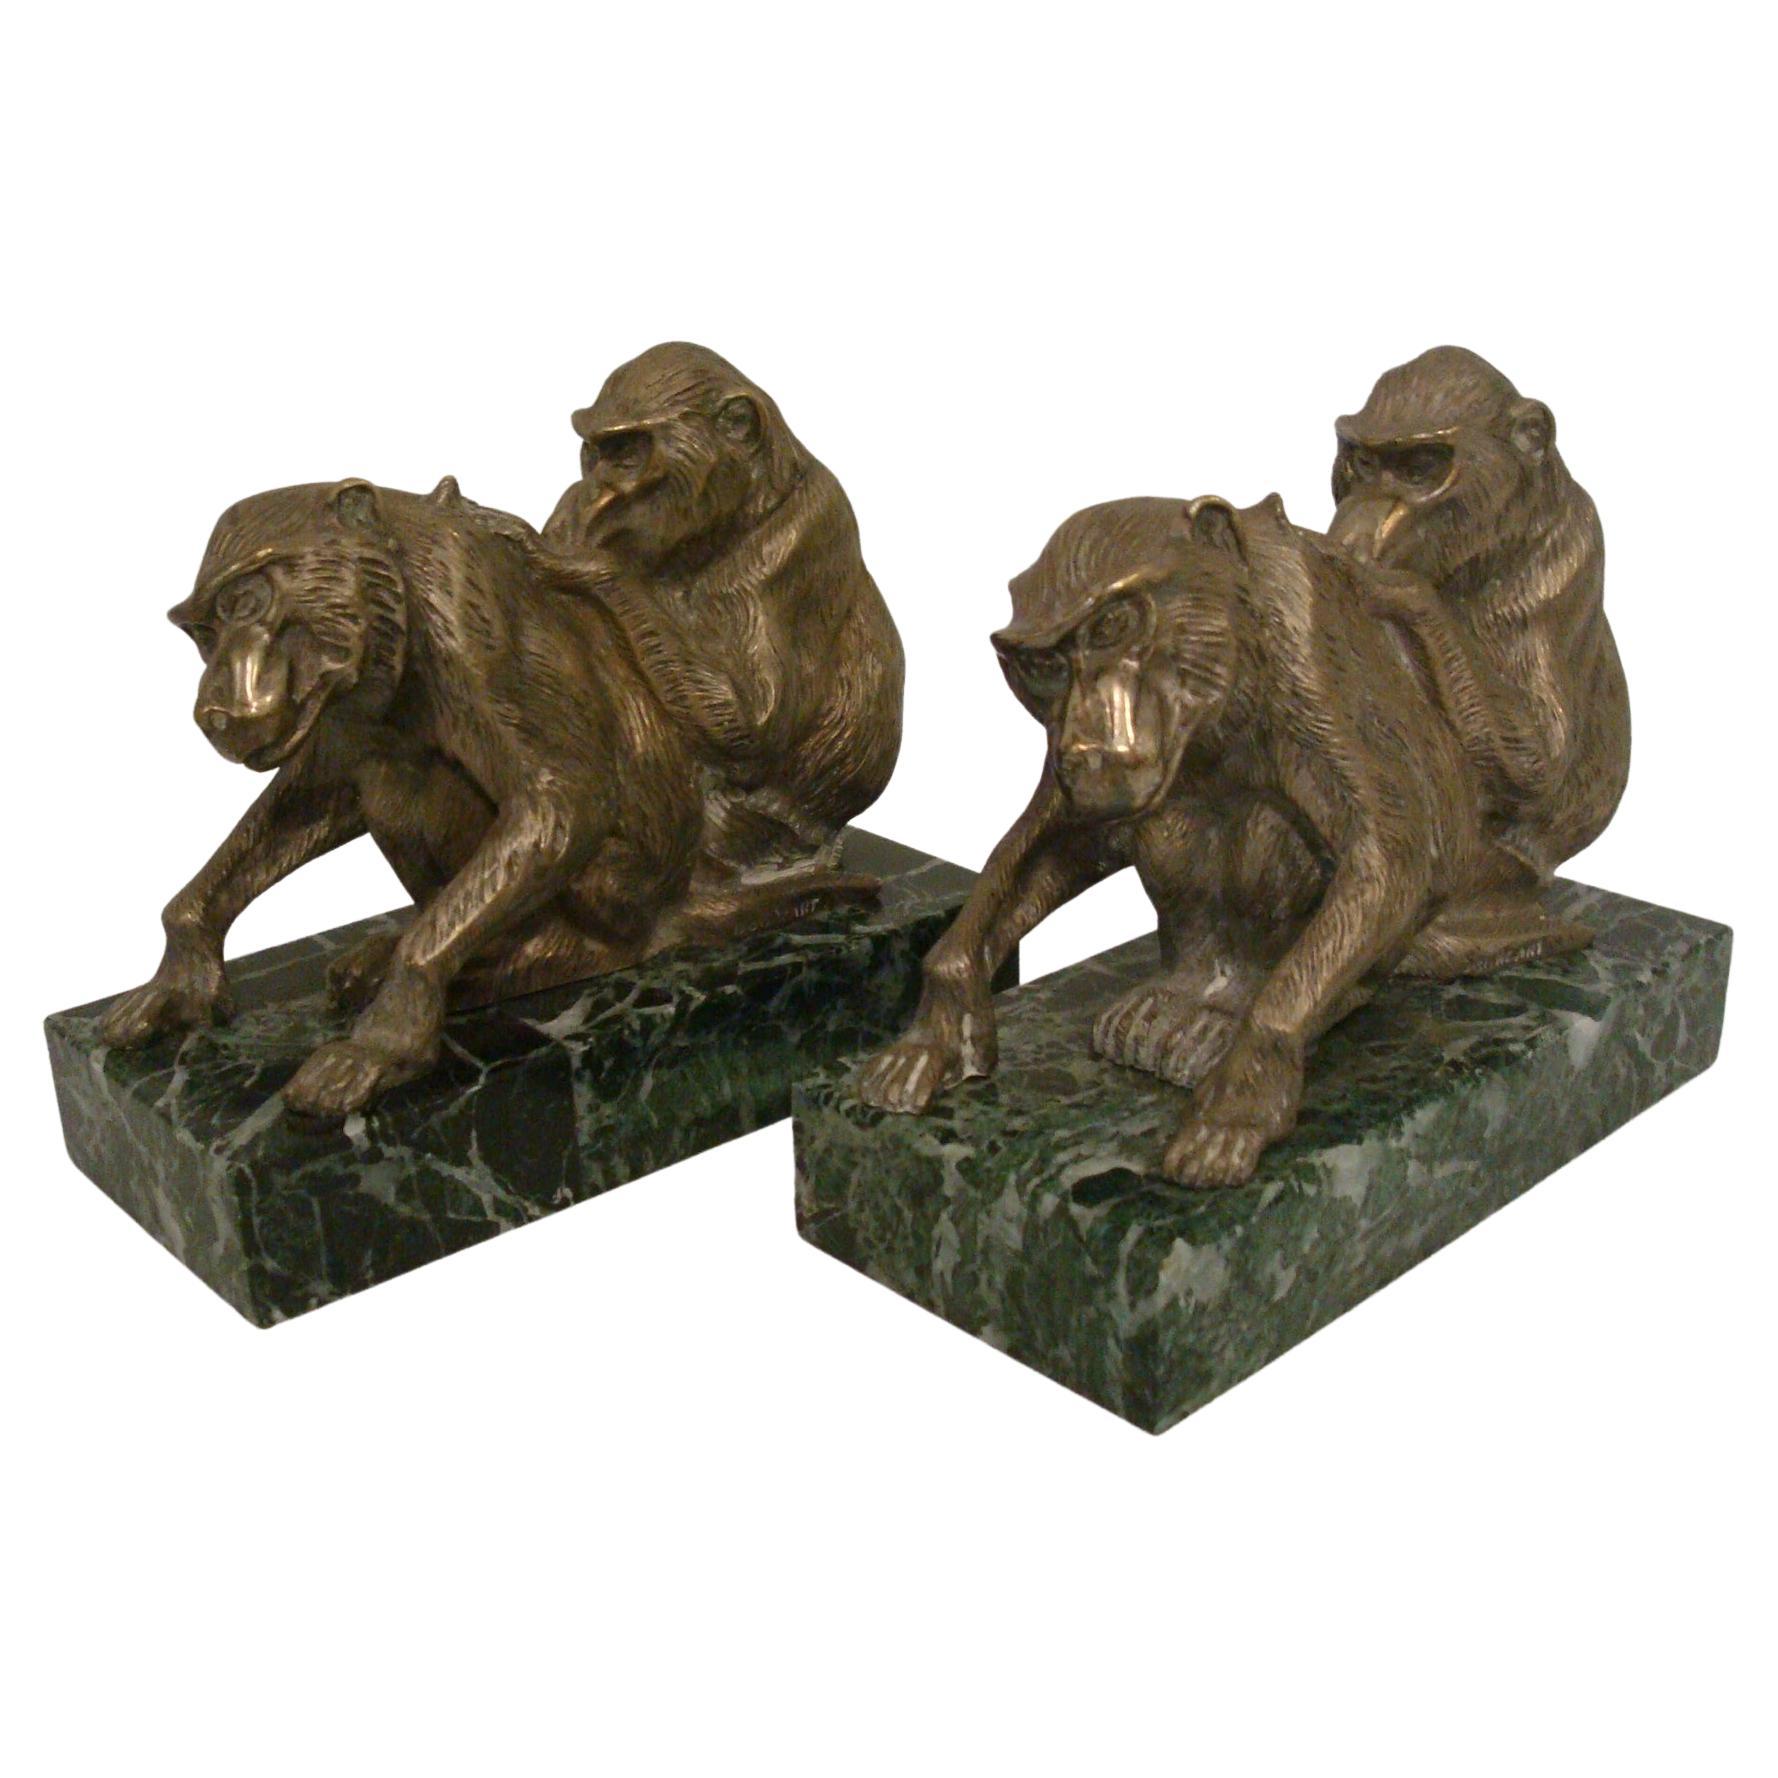 Art Deco Silvered Sculpture of a Group of Monkey's Bookends, France, circa 1925